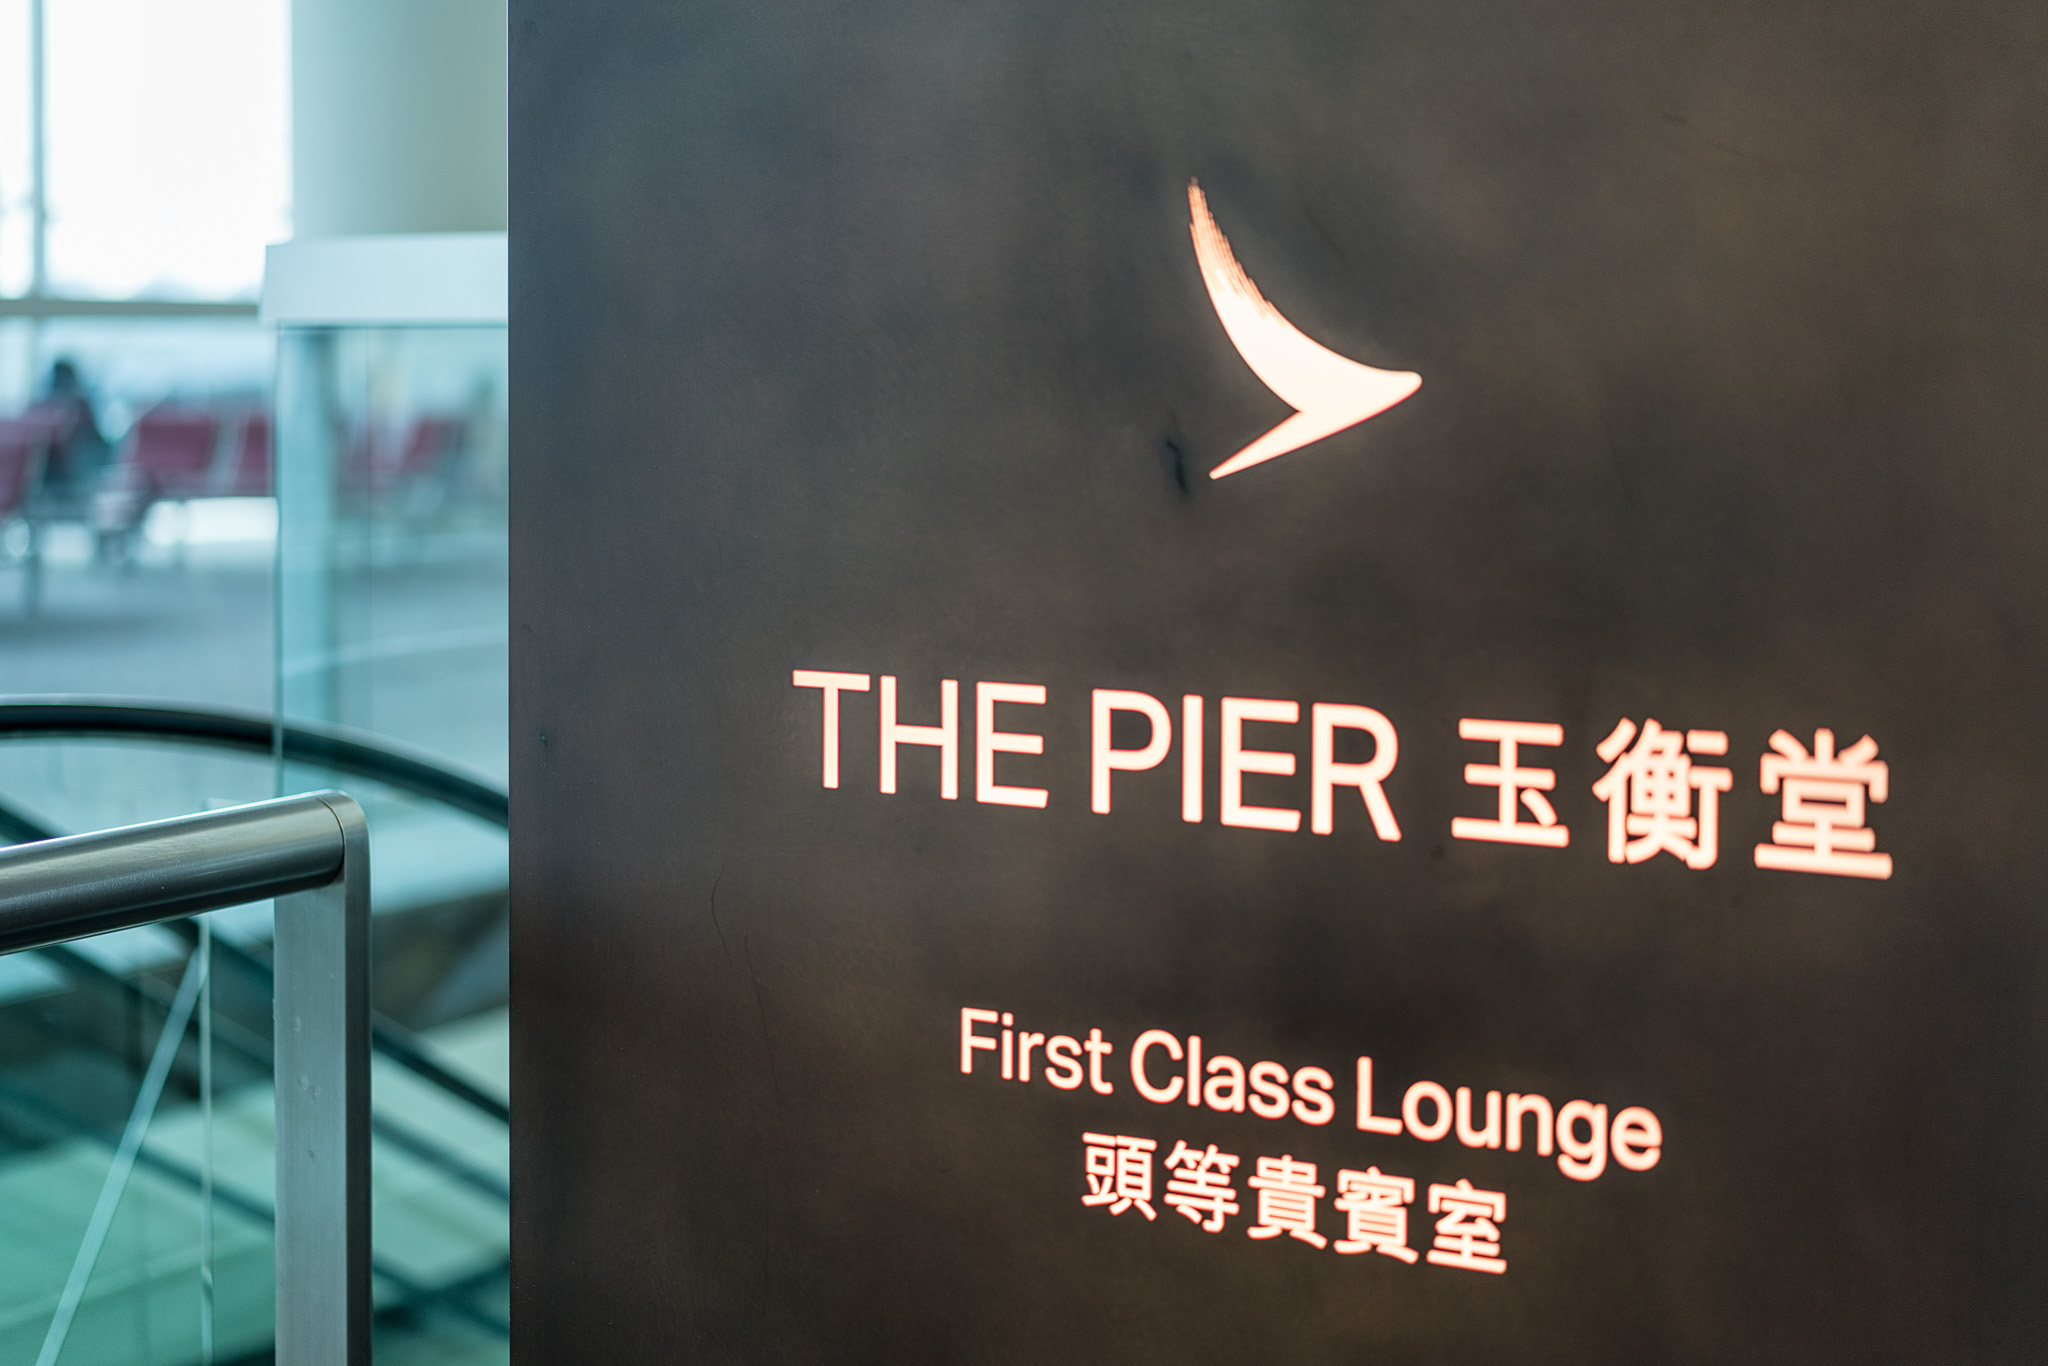 cathay pacific pier review